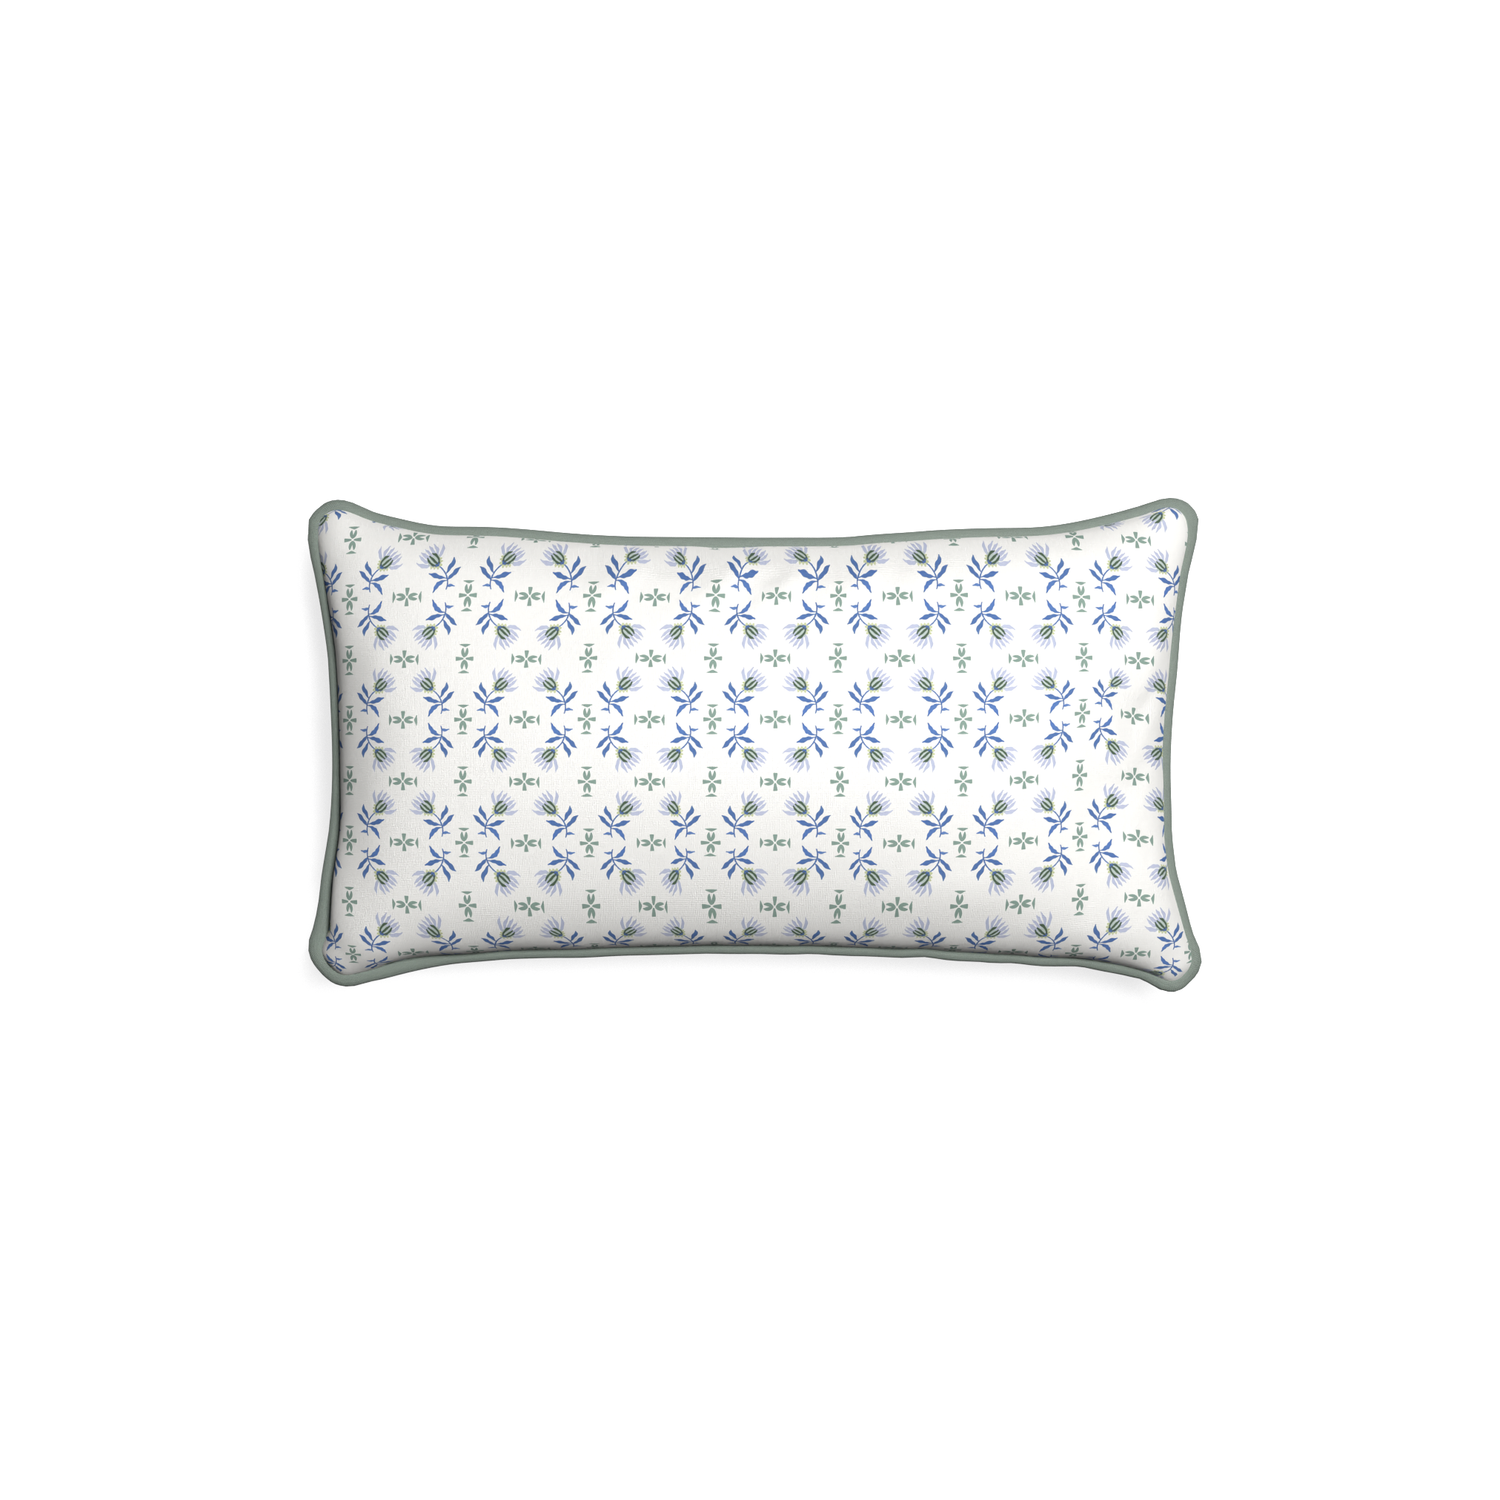 Petite-lumbar lee custom blue & green floralpillow with sage piping on white background